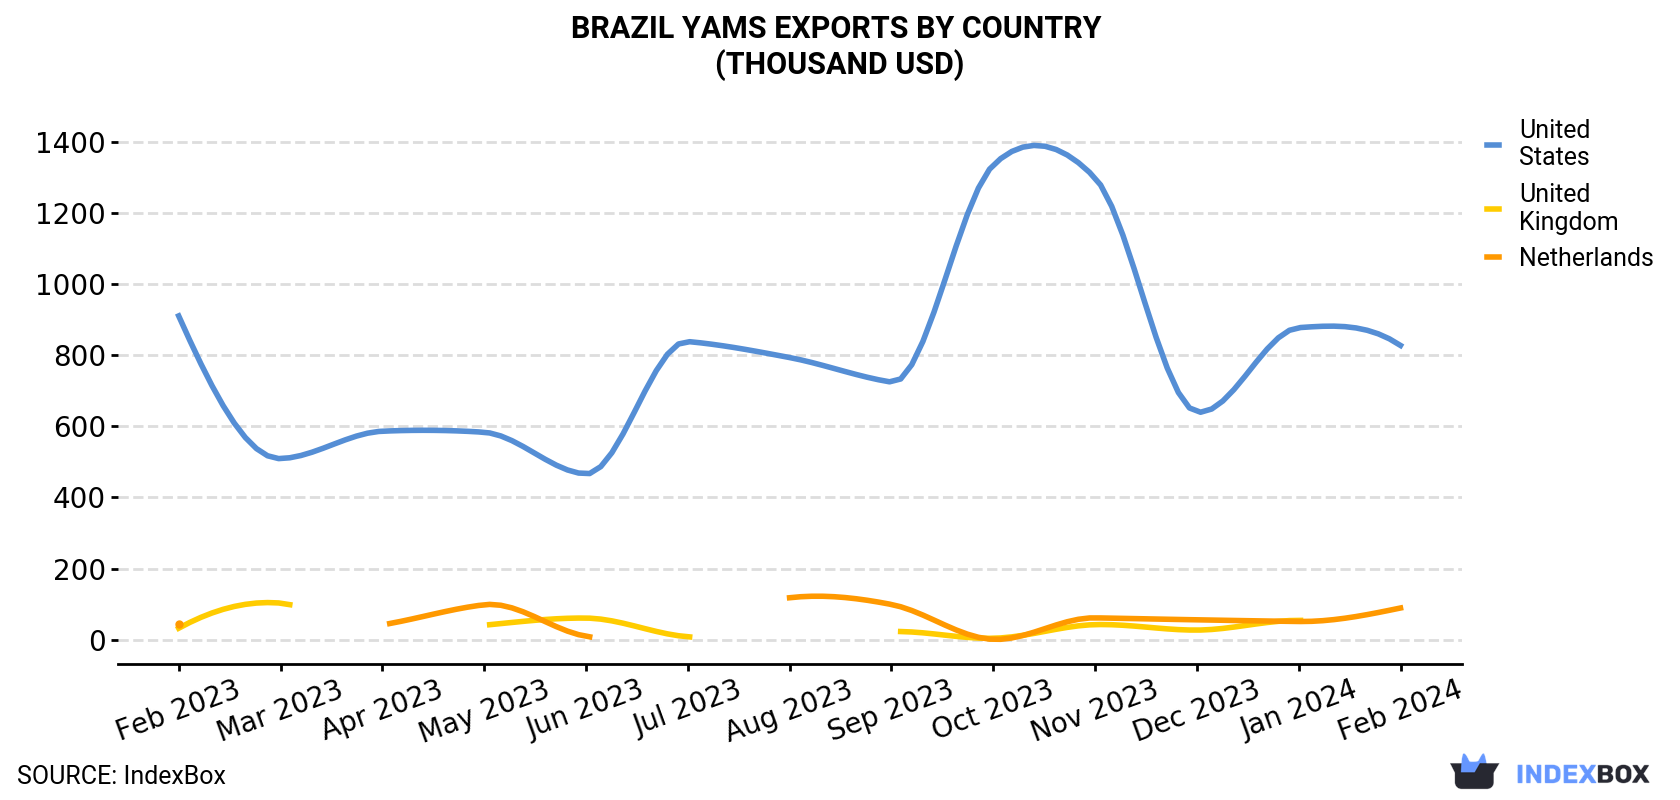 Brazil Yams Exports By Country (Thousand USD)